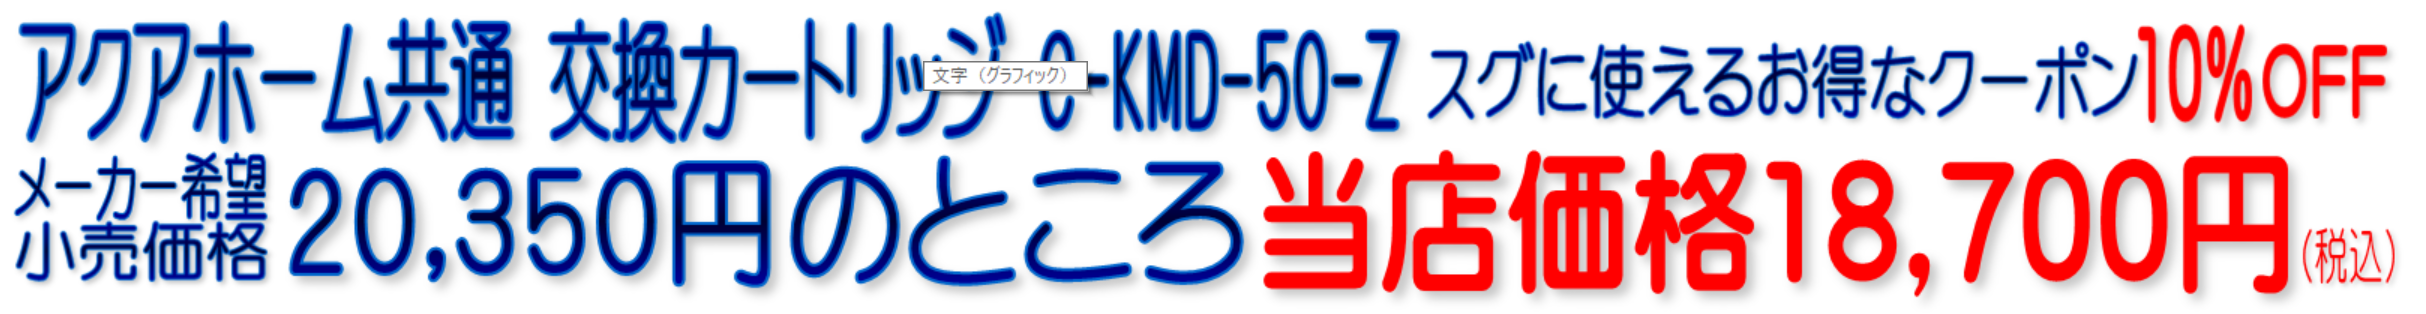 KMD-50ZS C-KMD-50-Z アクアホーム